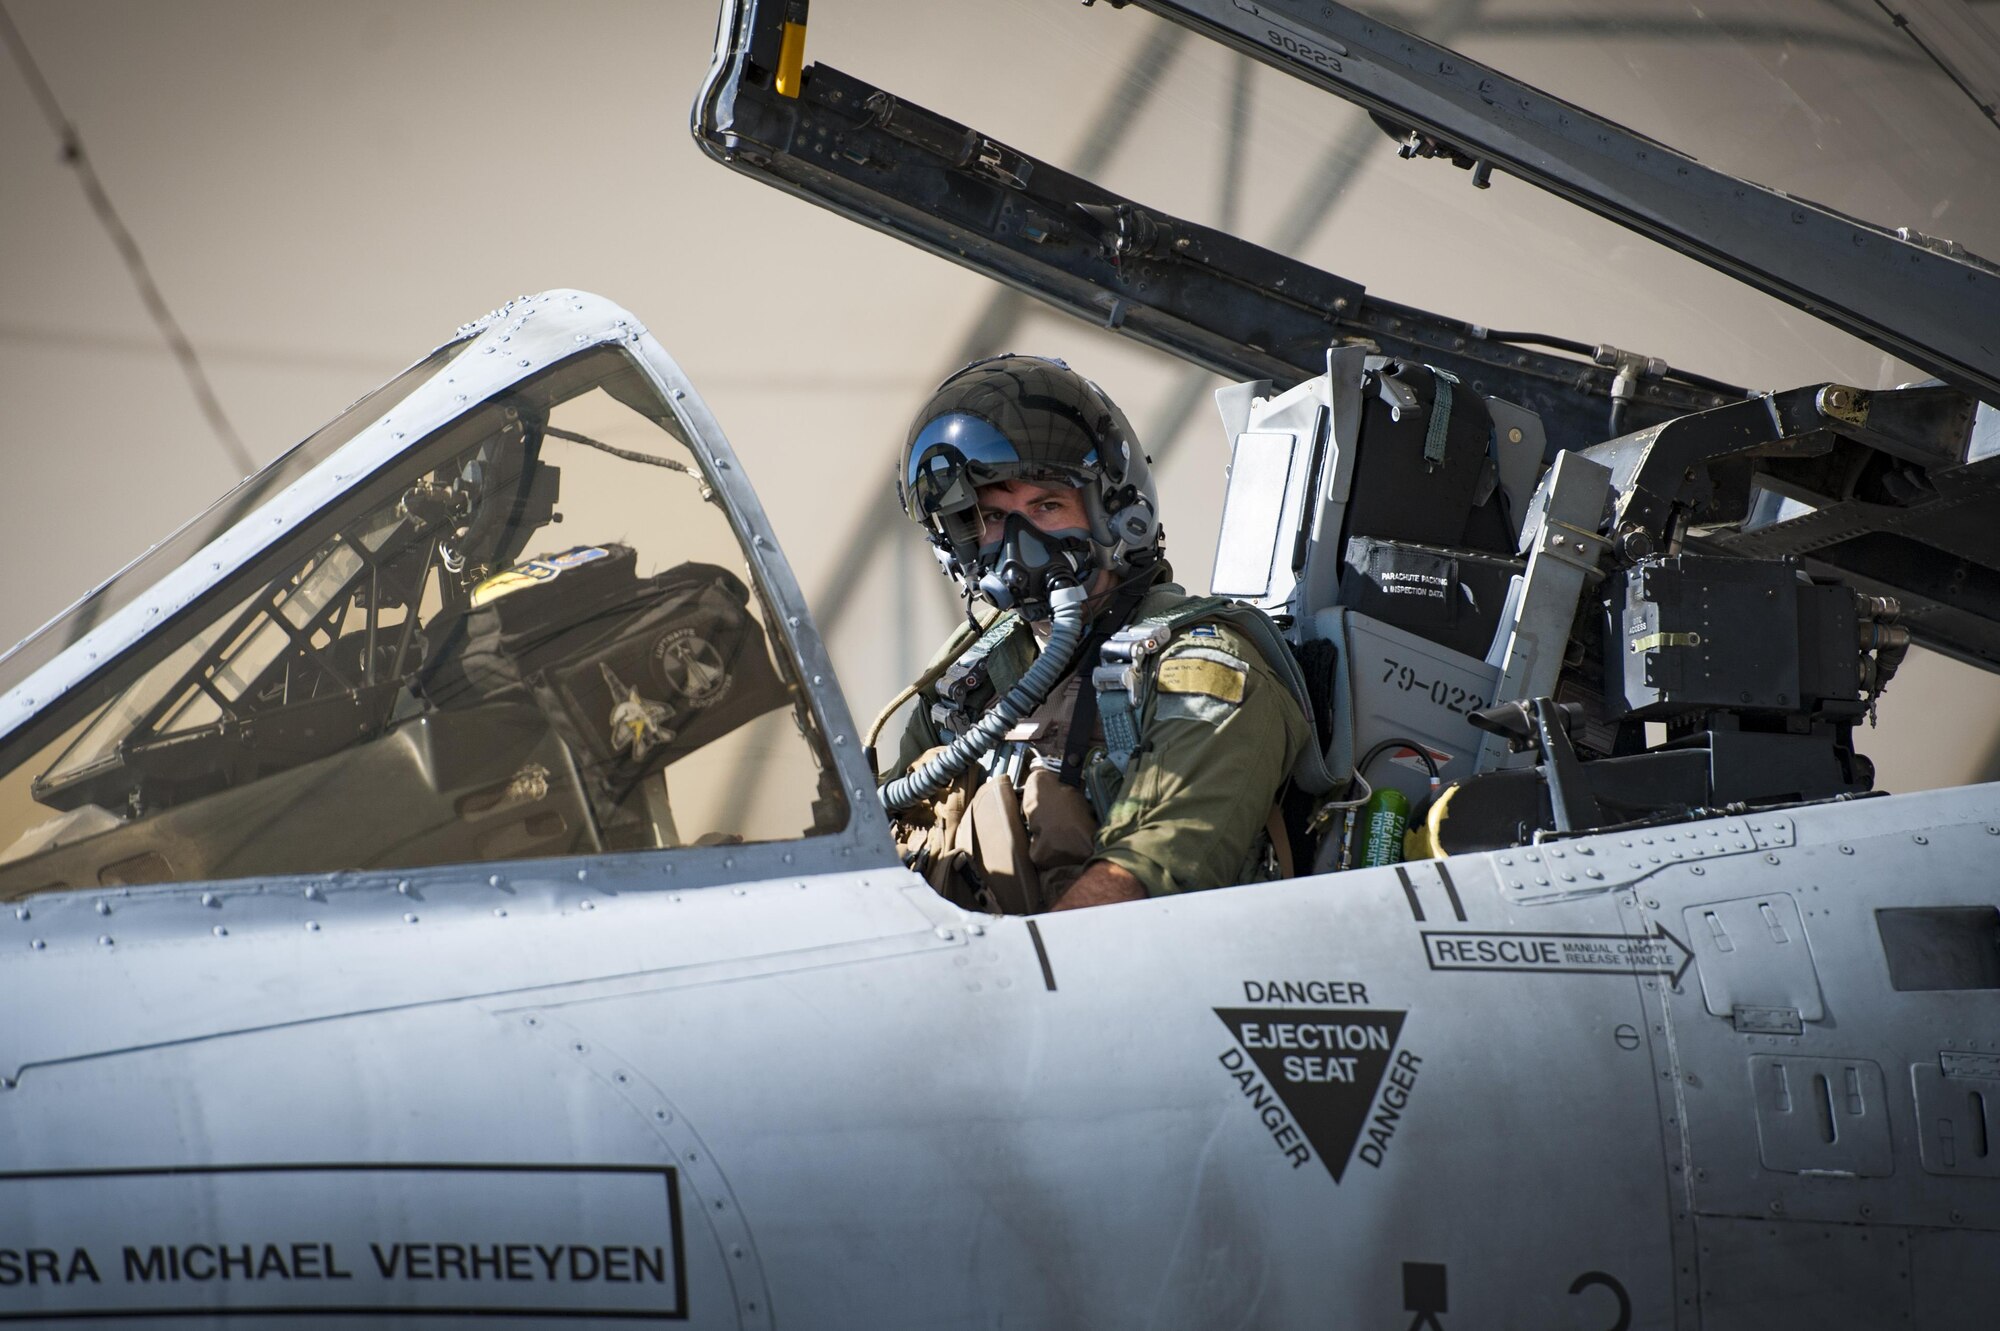 Capt. Andrew Nemethy, 74th Fighter Squadron pilot, prepares for take-off during a natural disaster exercise, April 19, 2017, at Moody Air Force Base, Ga. The exercise tested the wing’s ability to evacuate aircraft, secure assets and respond to emergency situations in the event of a real-world natural disaster. (U.S. Air Force photo by Airman 1st Class Lauren M. Sprunk)